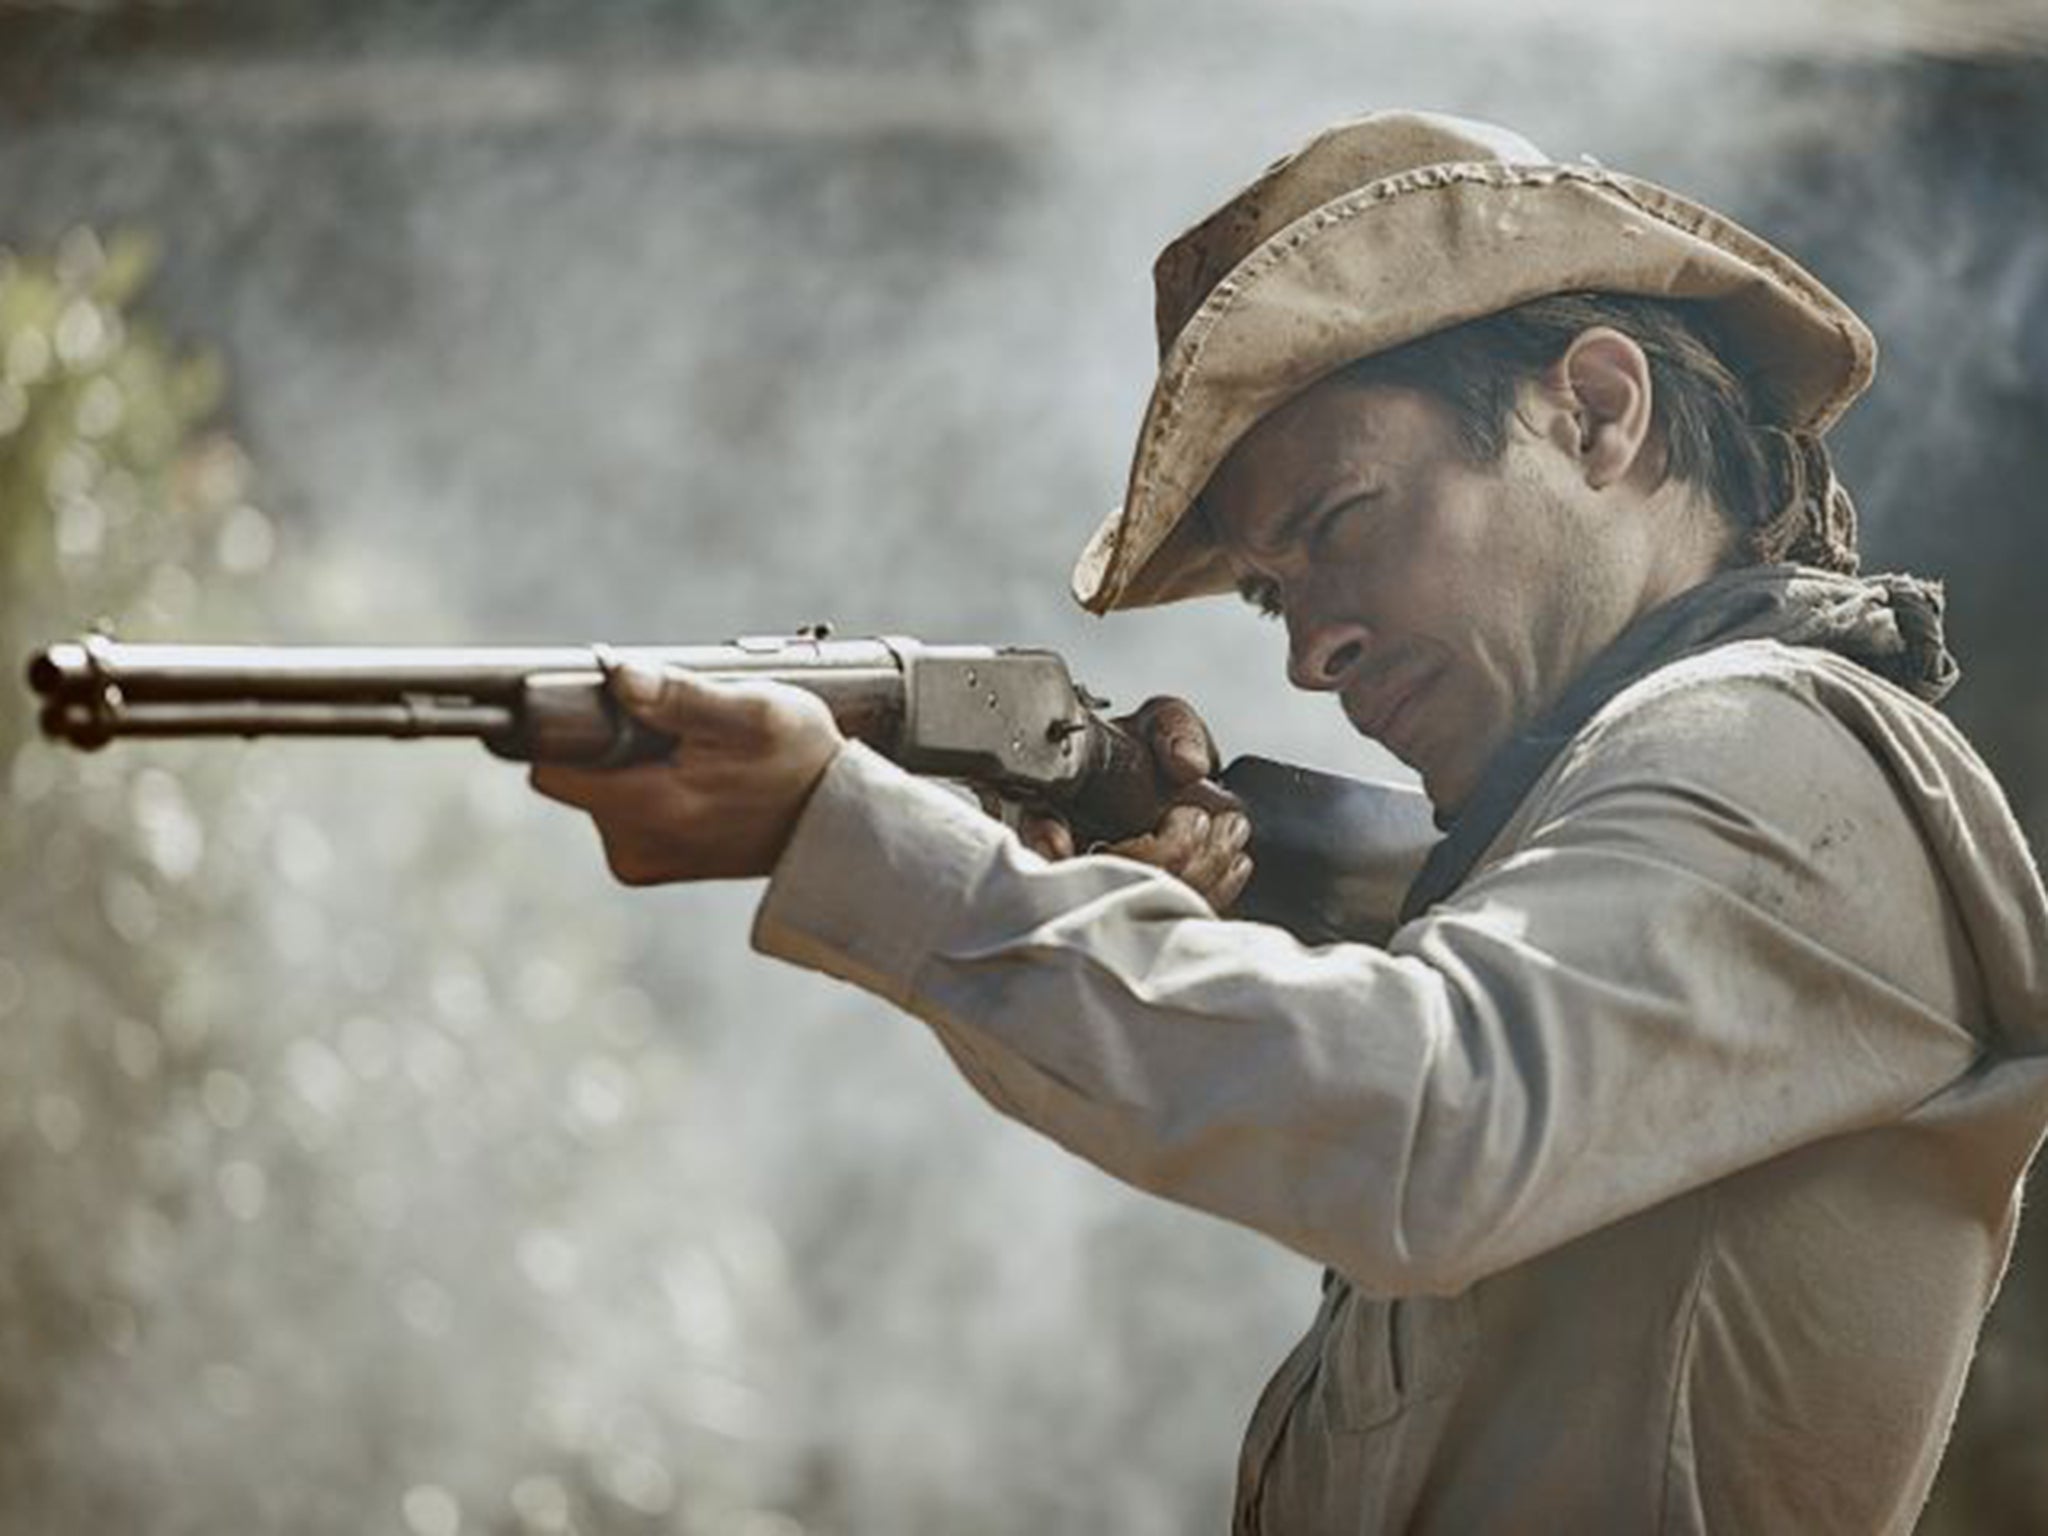 Gael Garcia Bernal becomes the hunter in bloody epic ‘The Burning’